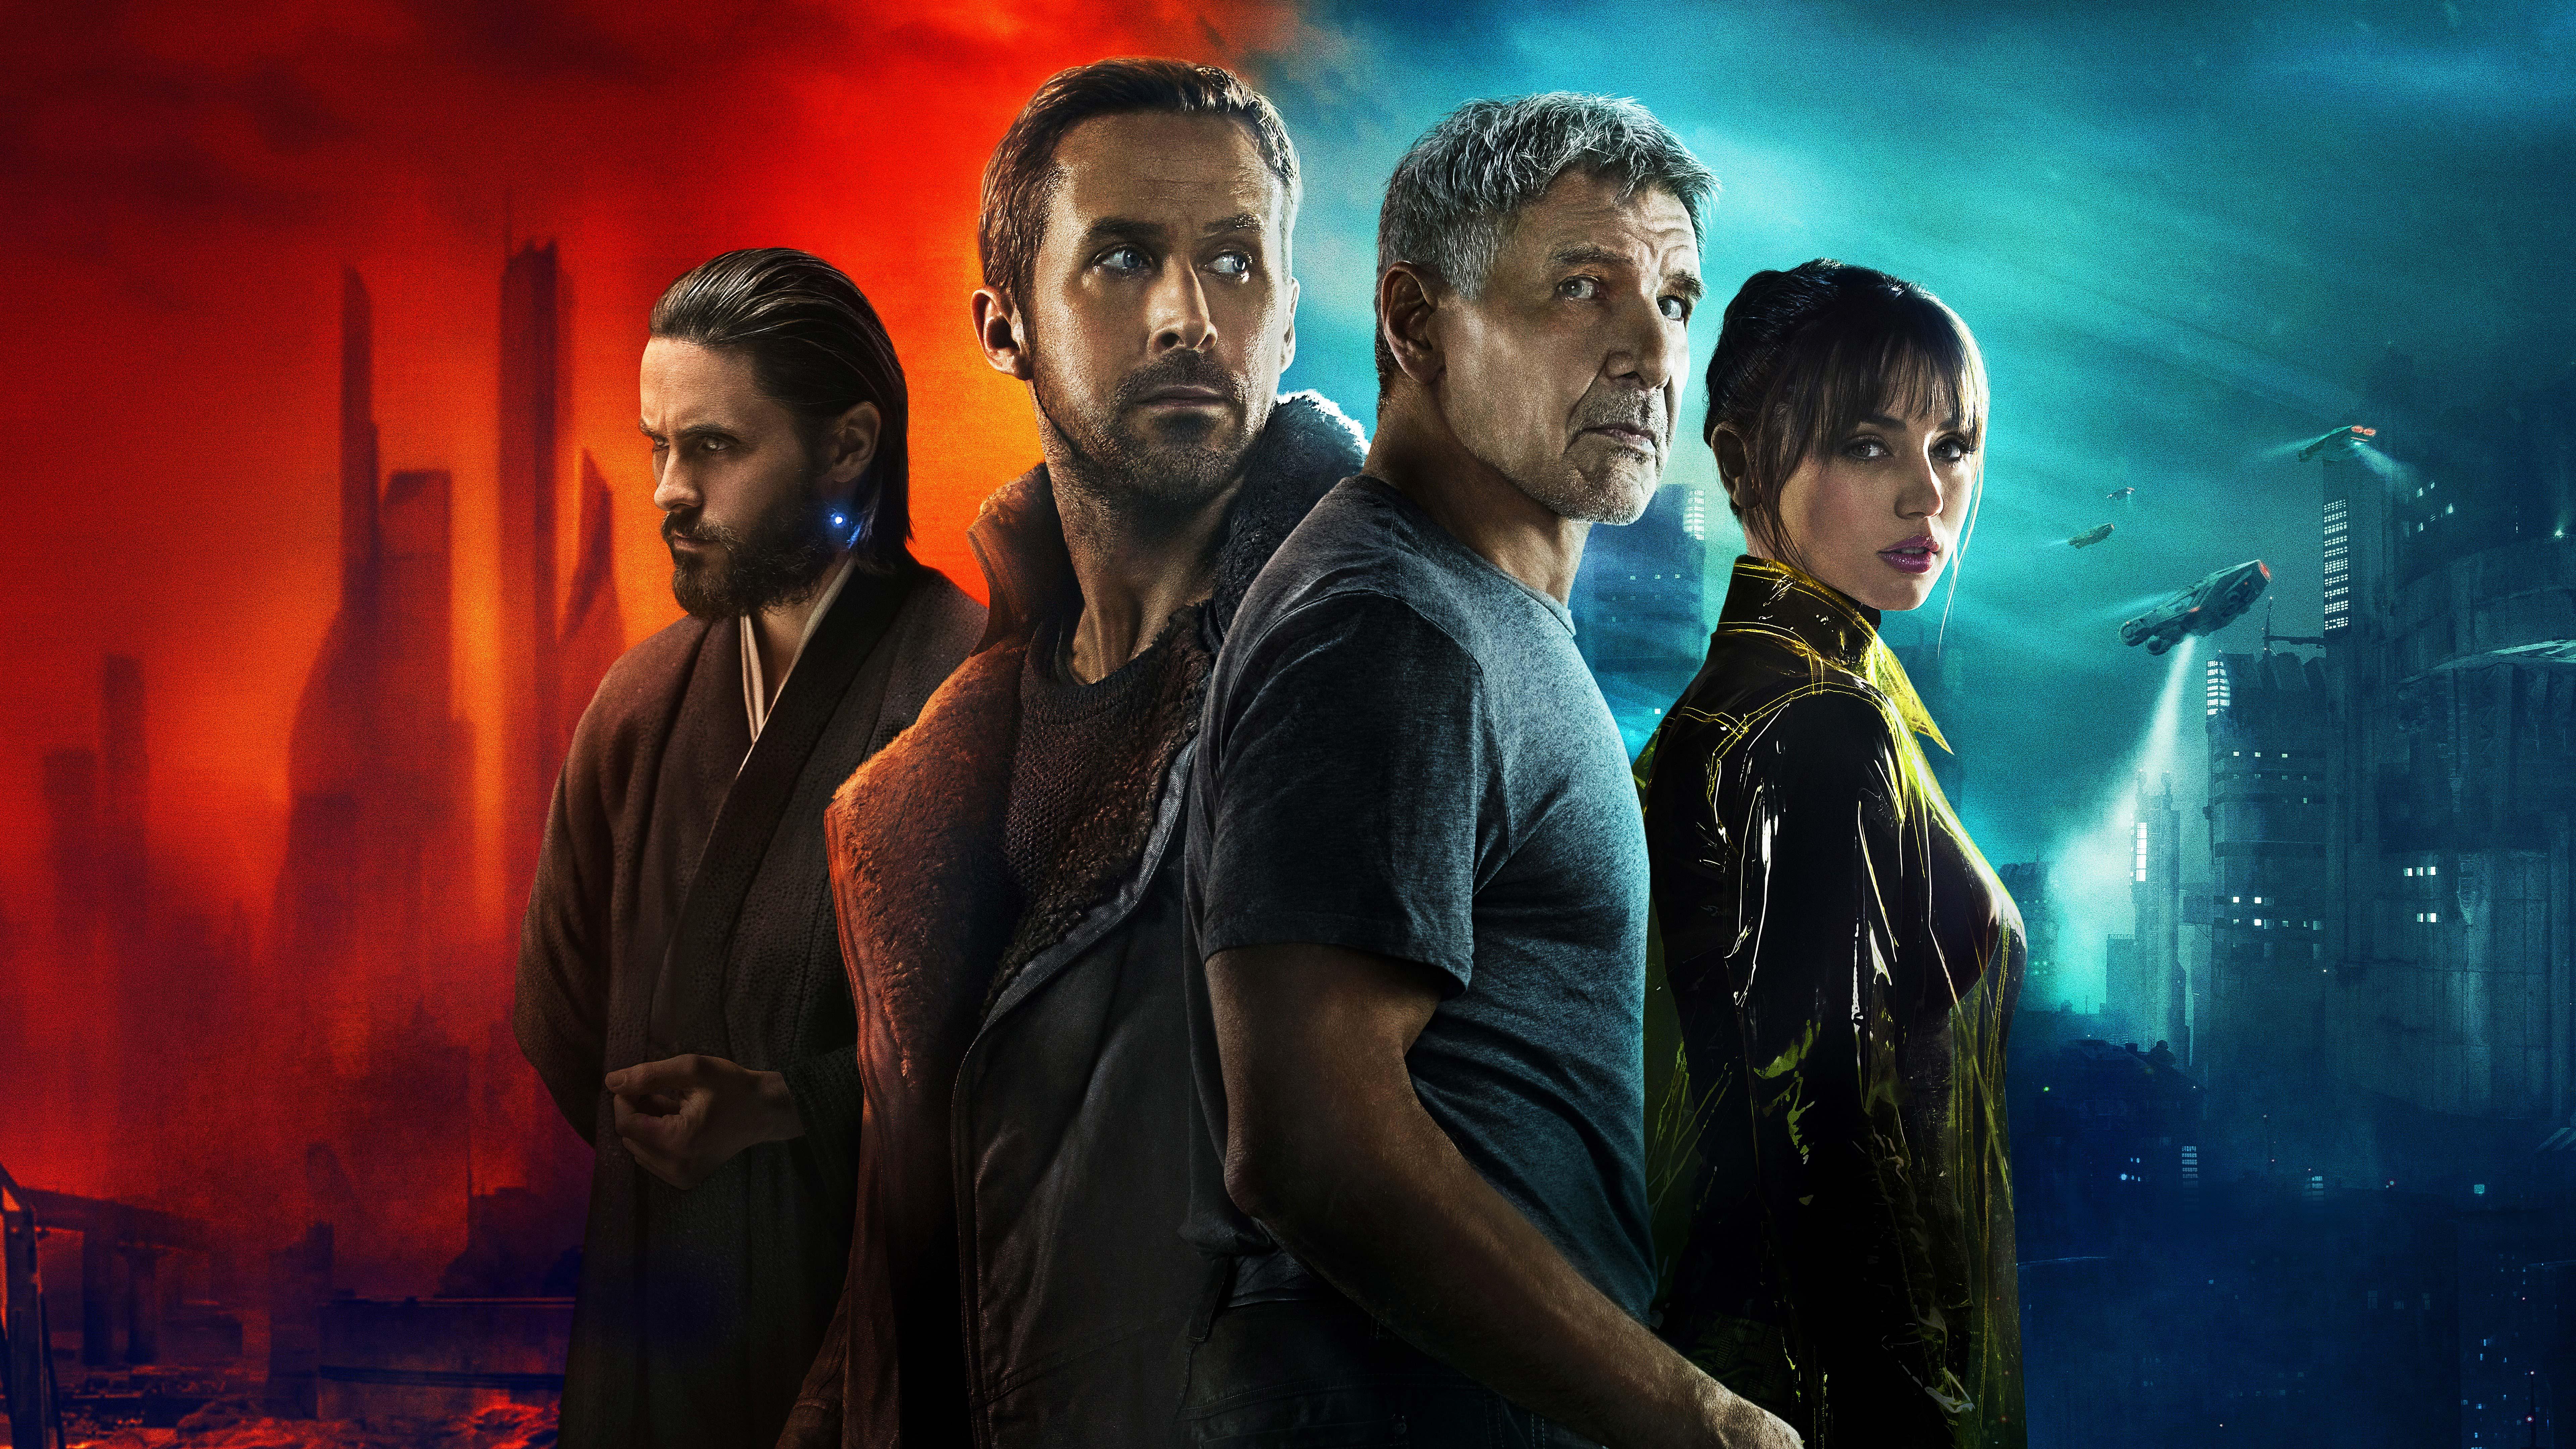 7680 x 4320 · jpeg - Blade Runner 2049 8k, HD Movies, 4k Wallpapers, Images, Backgrounds ...